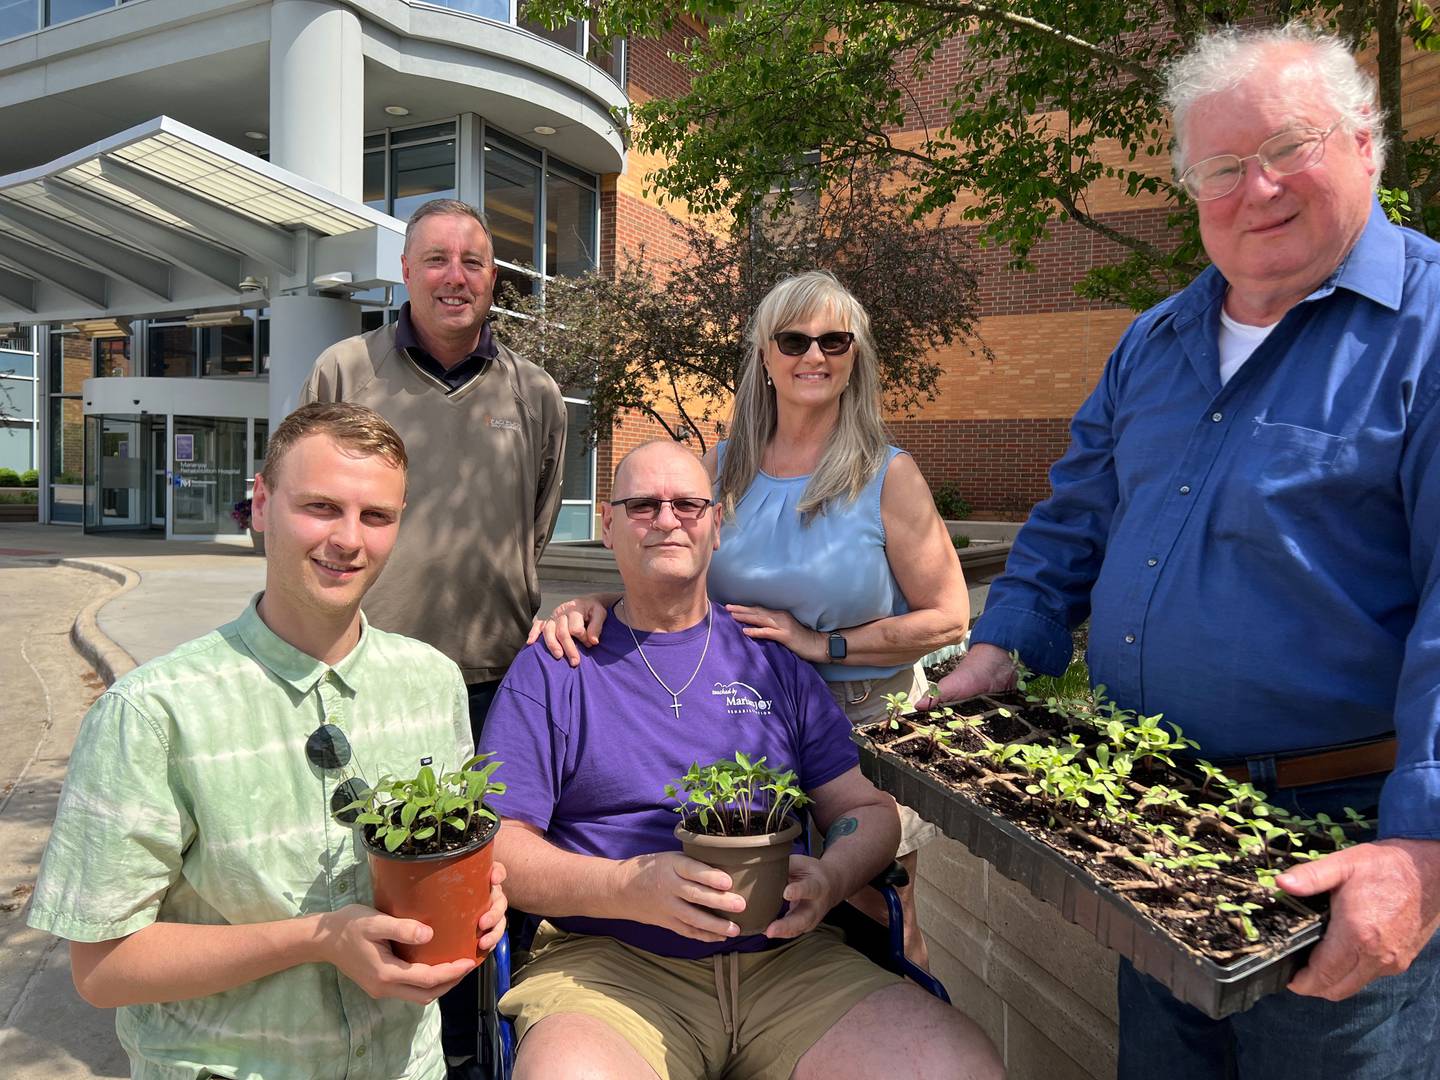 Recovering alcoholic Sean Flannery of Joliet (left) recently planted 100 sunflower seedings near the chapel at Northwestern Medicine Marianjoy Rehabilitation Hospital in gratitude for helping his father Tim Flannery of Joliet (center) recover from a motorcycle accident. Also pictured are, from left:  Jeff Jones, Marianjoy groundskeeper; Joann Flannery, Tim's wife; and Ray Ward, Marianjoy grounds supervisor.